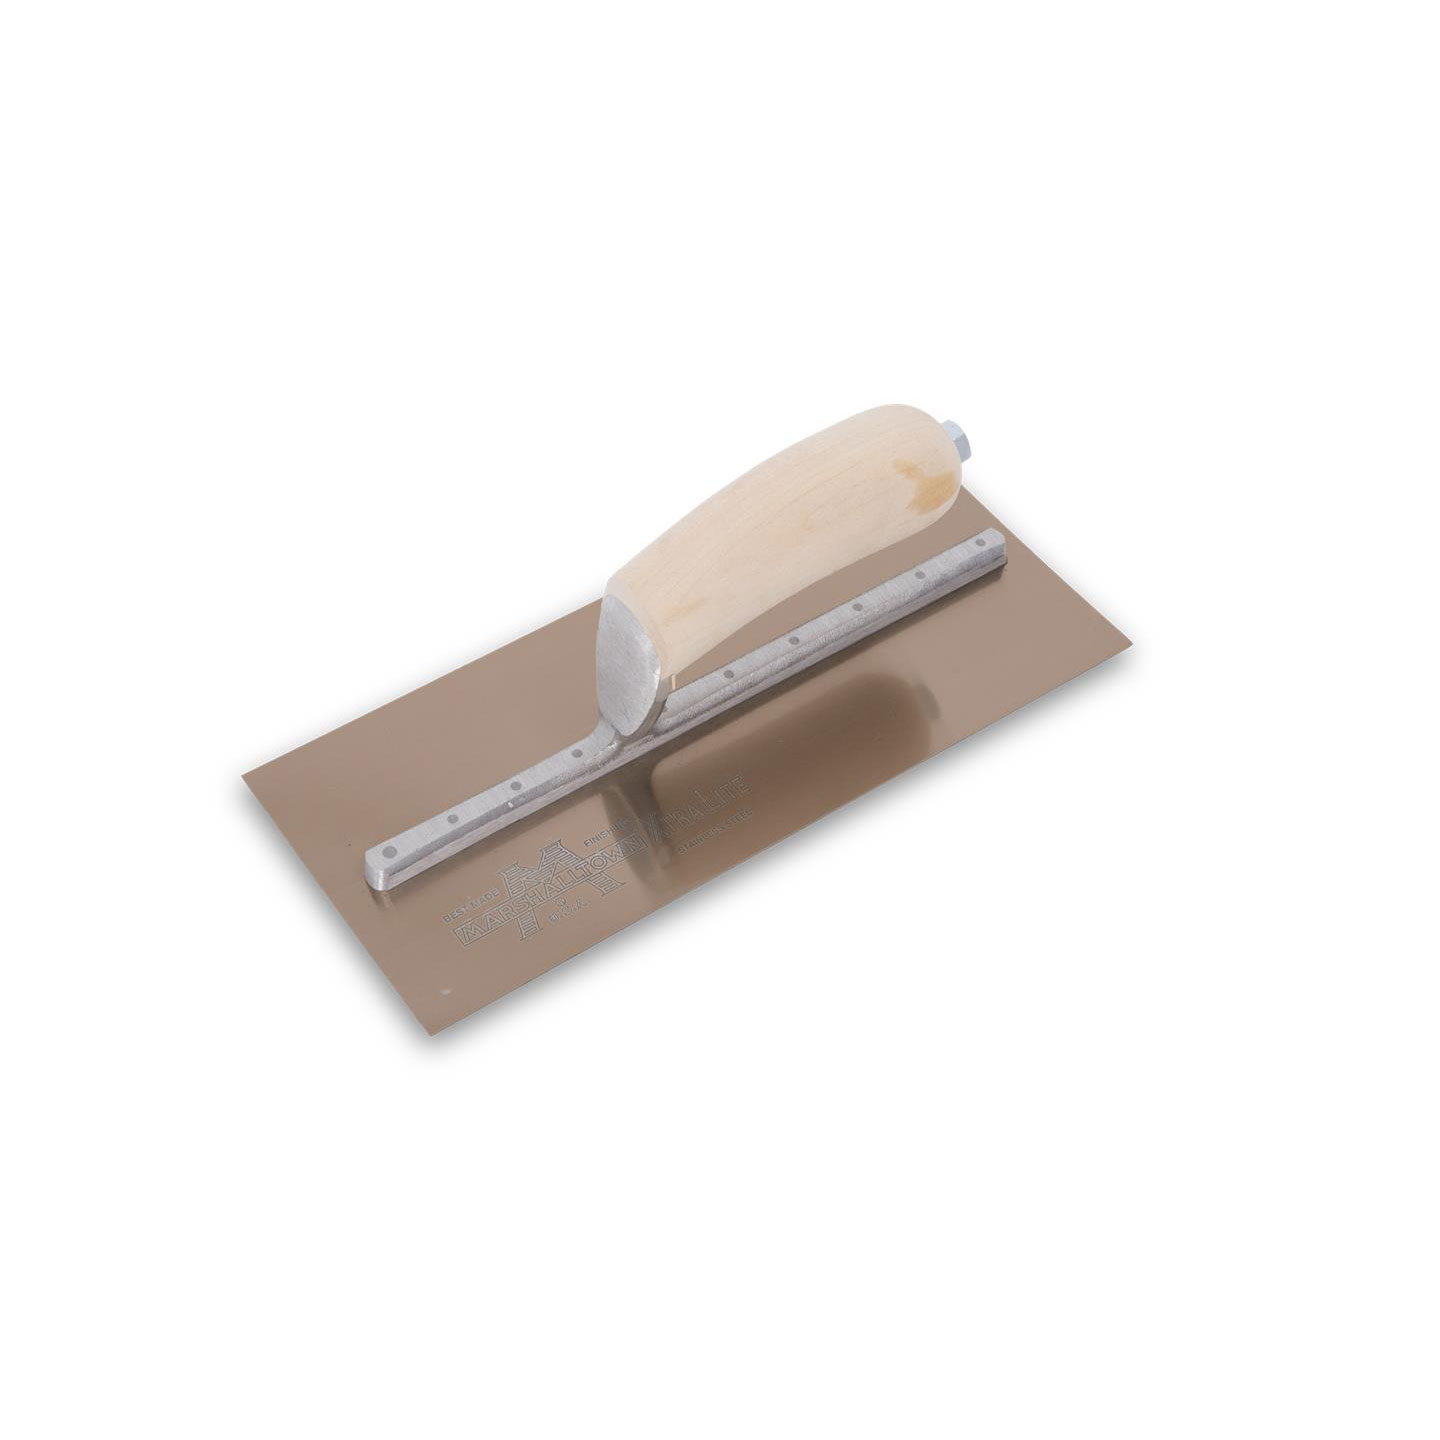 Marshalltown MXS1GS 11in x 4-1/2in Golden Stainless Finishing Trowel with Curved Wood Handle MXS1GS